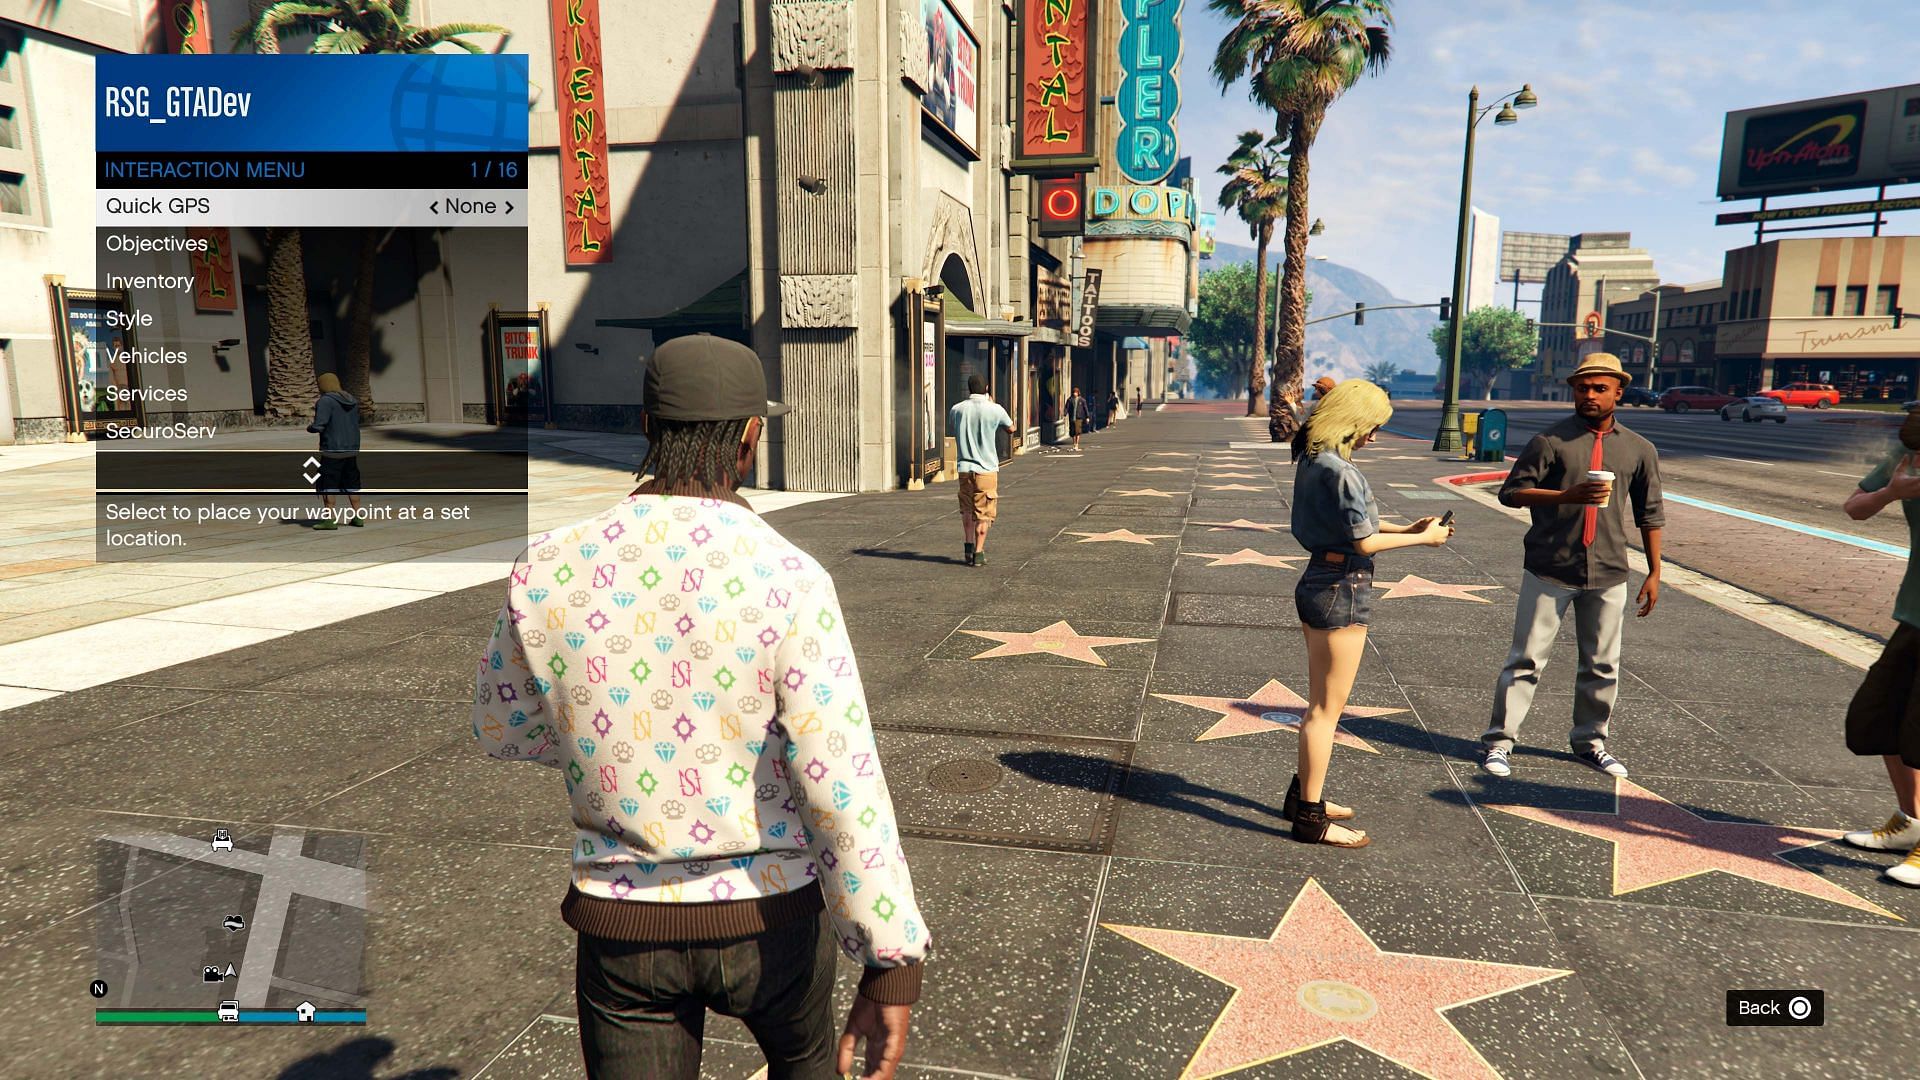 GTA Online features an Interaction Menu that is quite useful (Image via Rockstar)